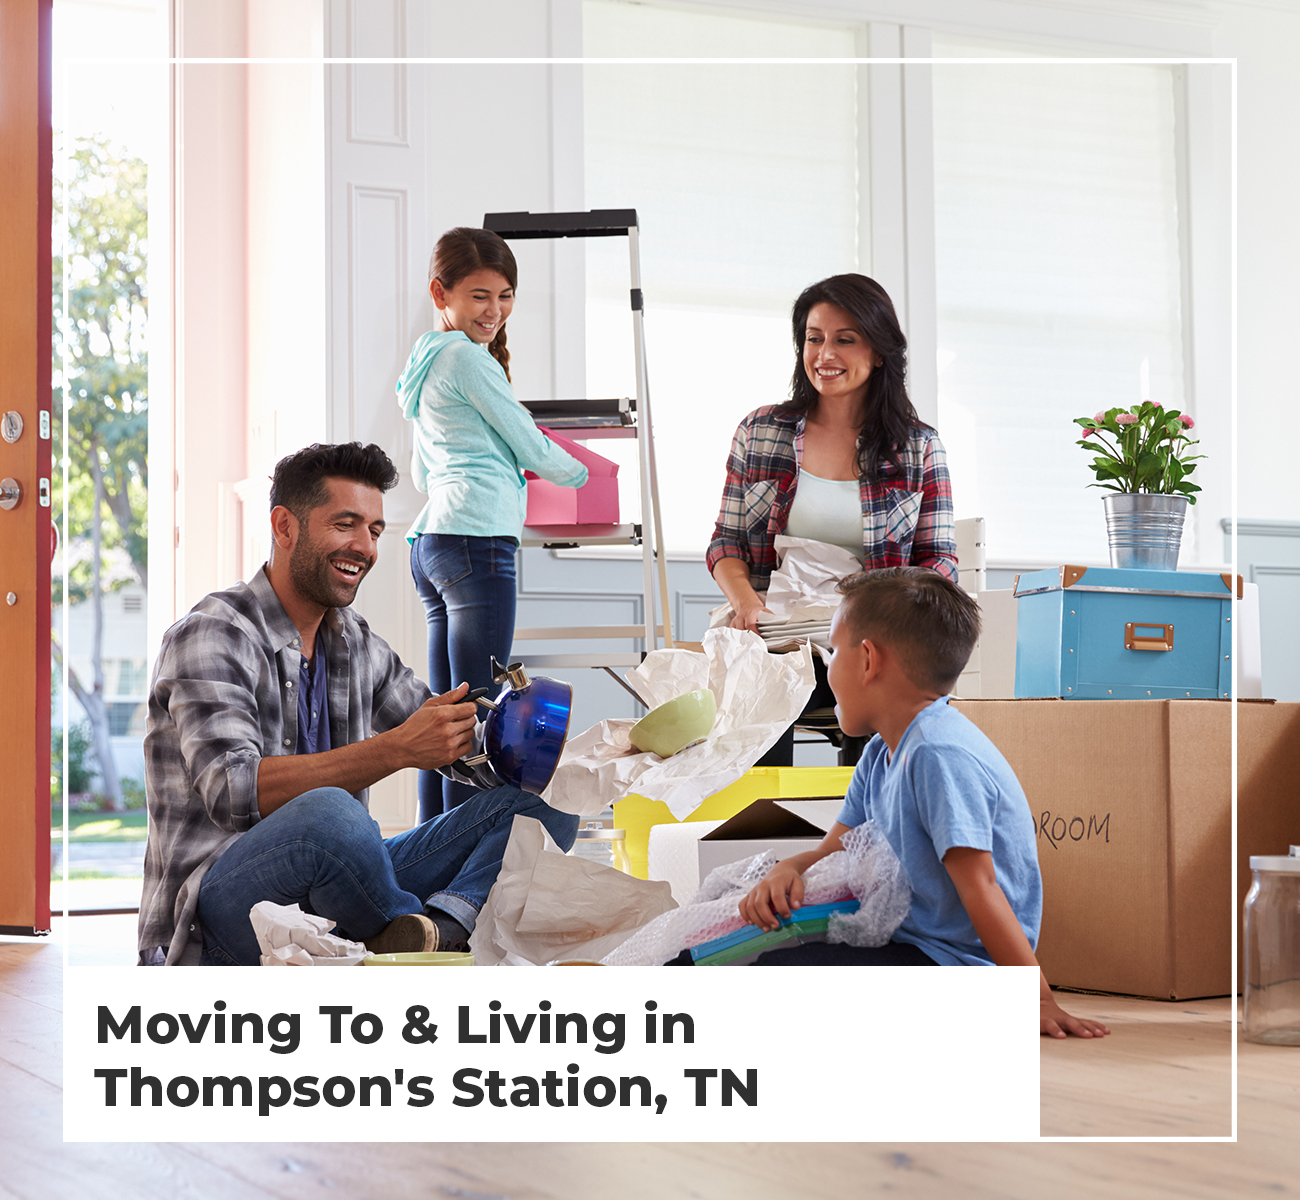 Moving To & Living in Thompson's Station, TN